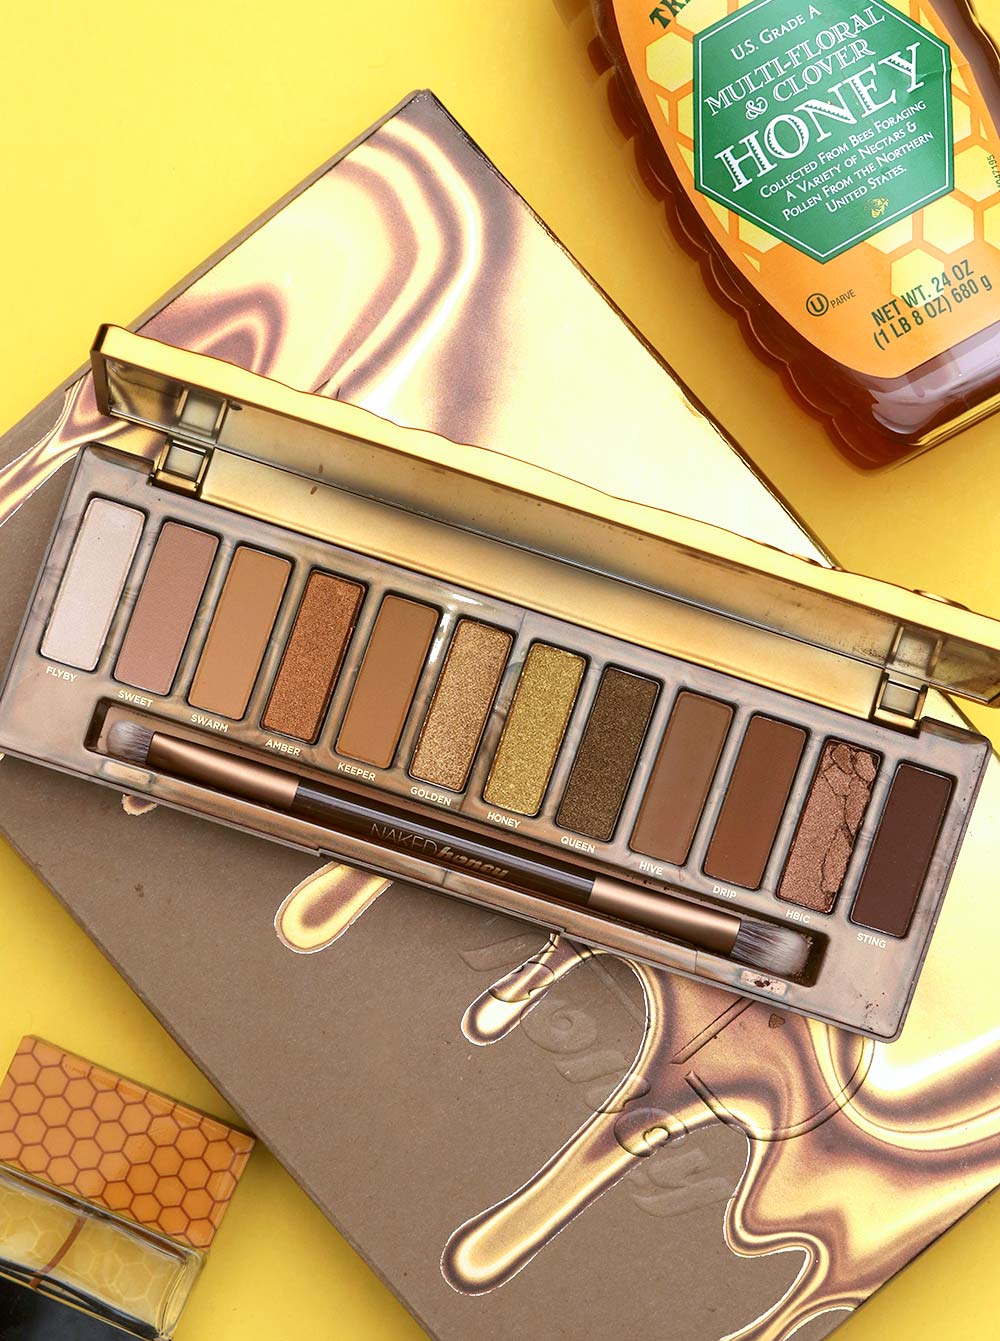 Urban decay naked honey review the palette's unexpected star